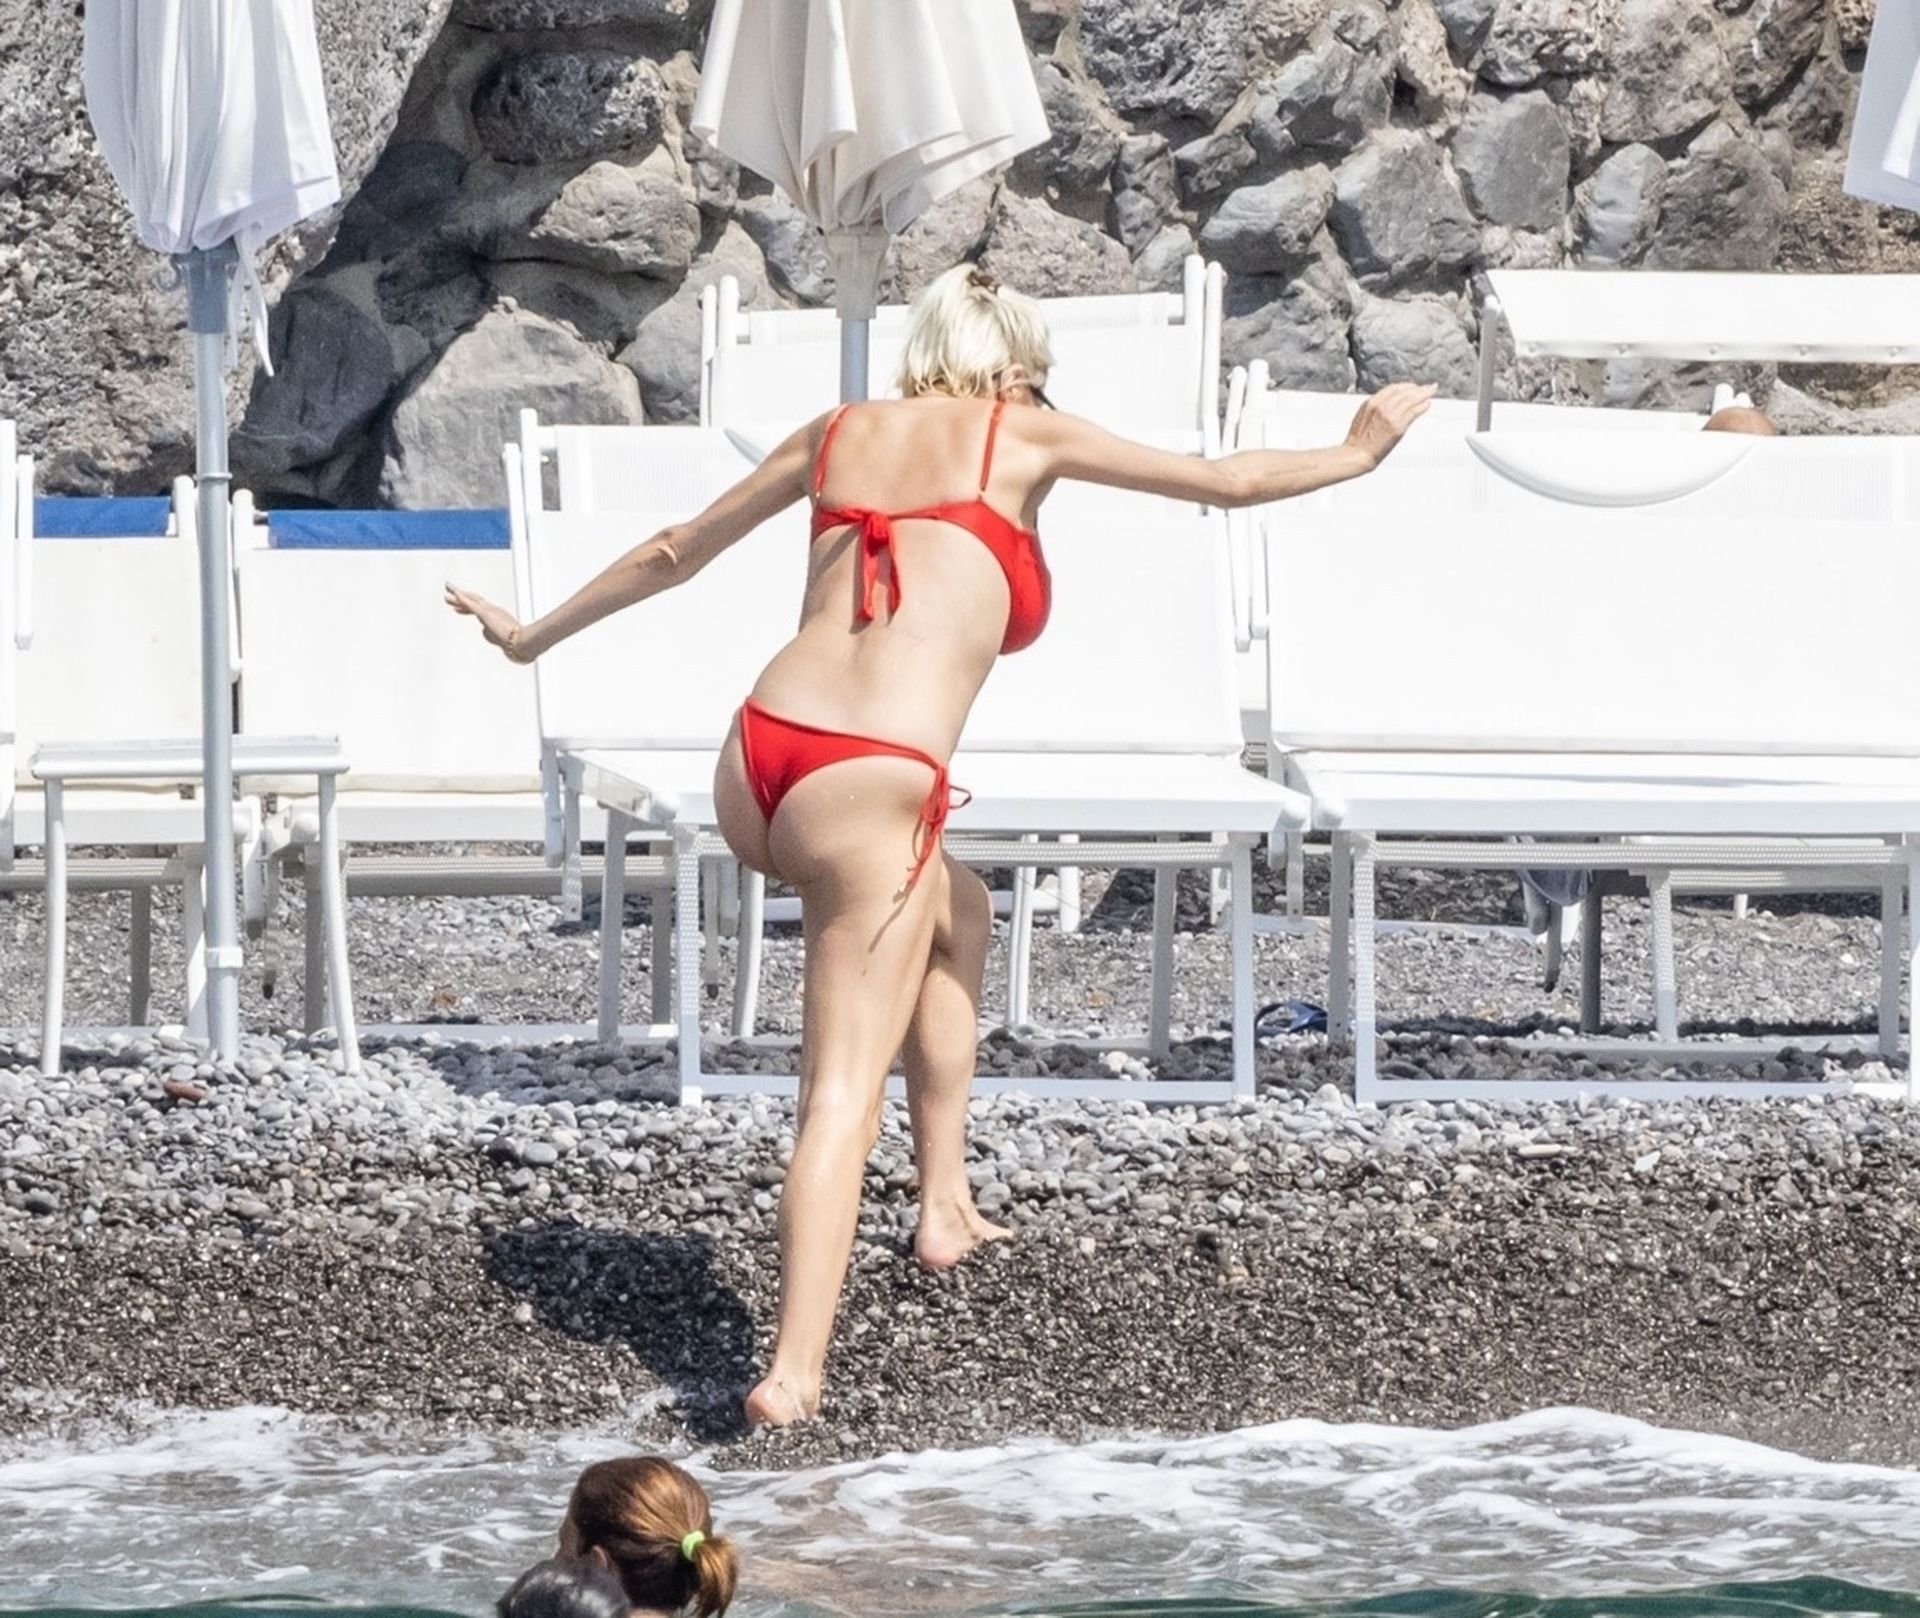 Caroline Vreeland Shows Off Her Sultry Beach Body Physique in a Red Bikini (43 Photos)